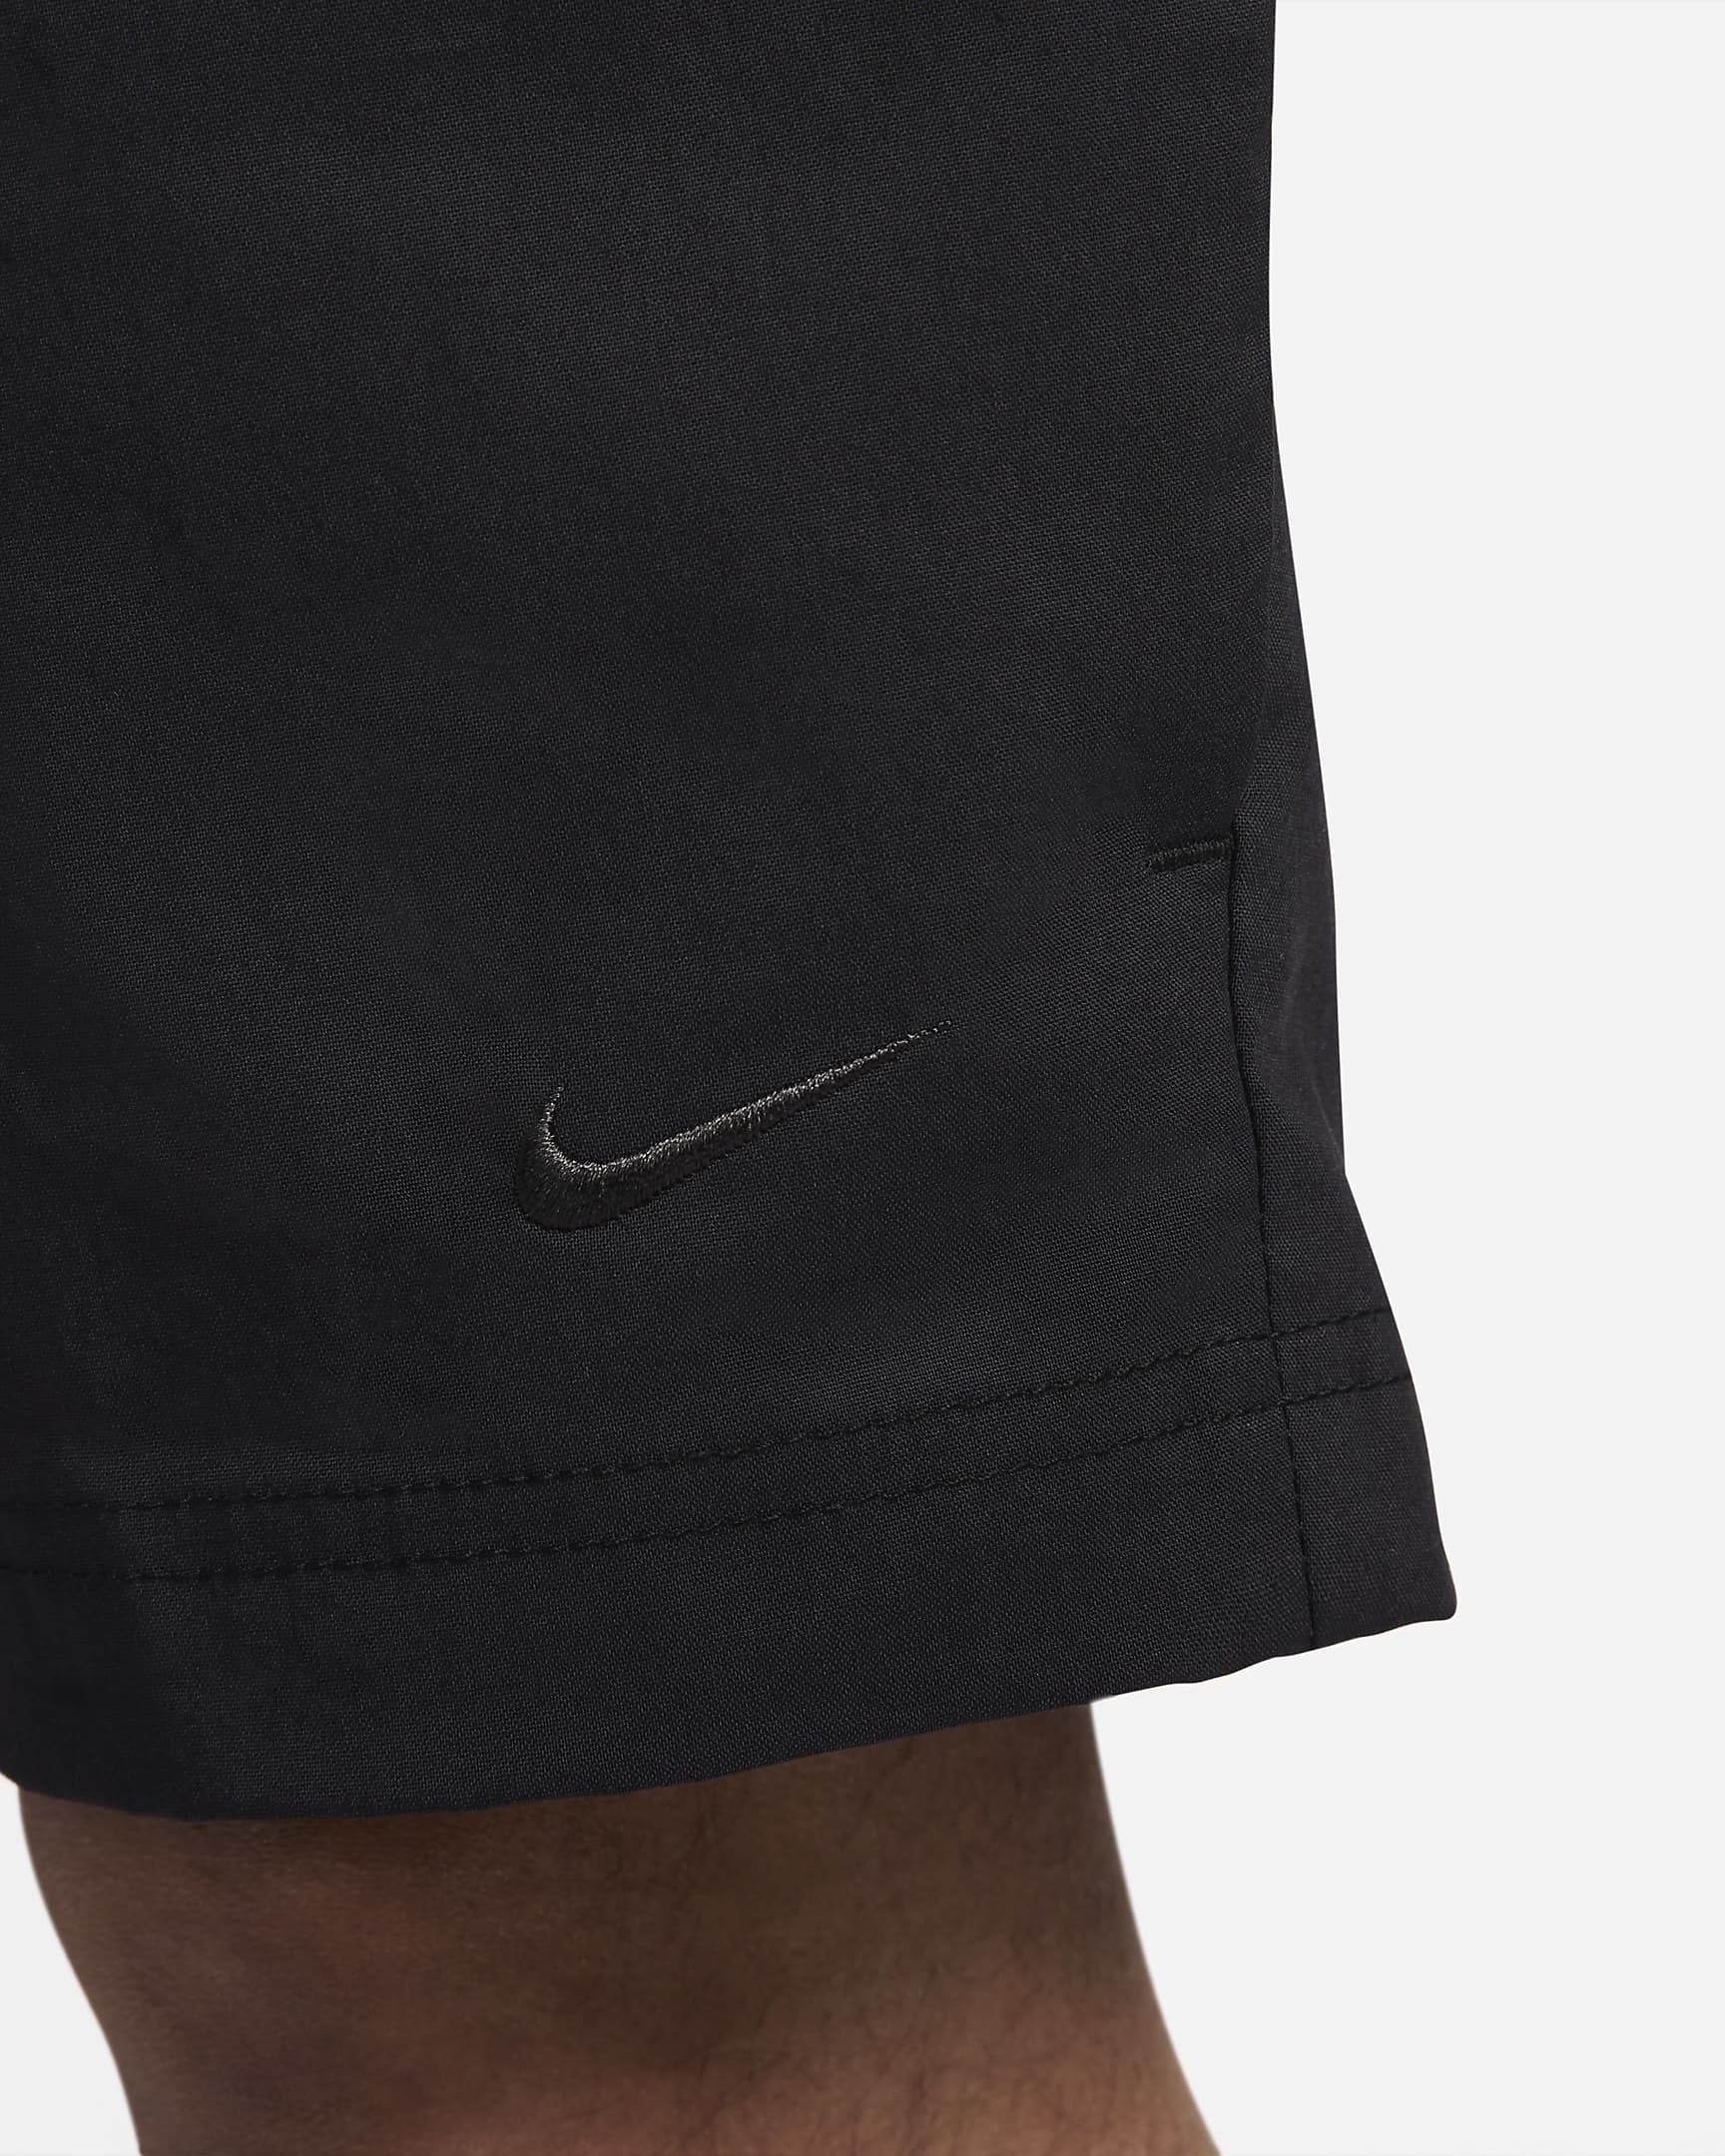 Nike Unscripted Men's Golf Shorts. Nike IN